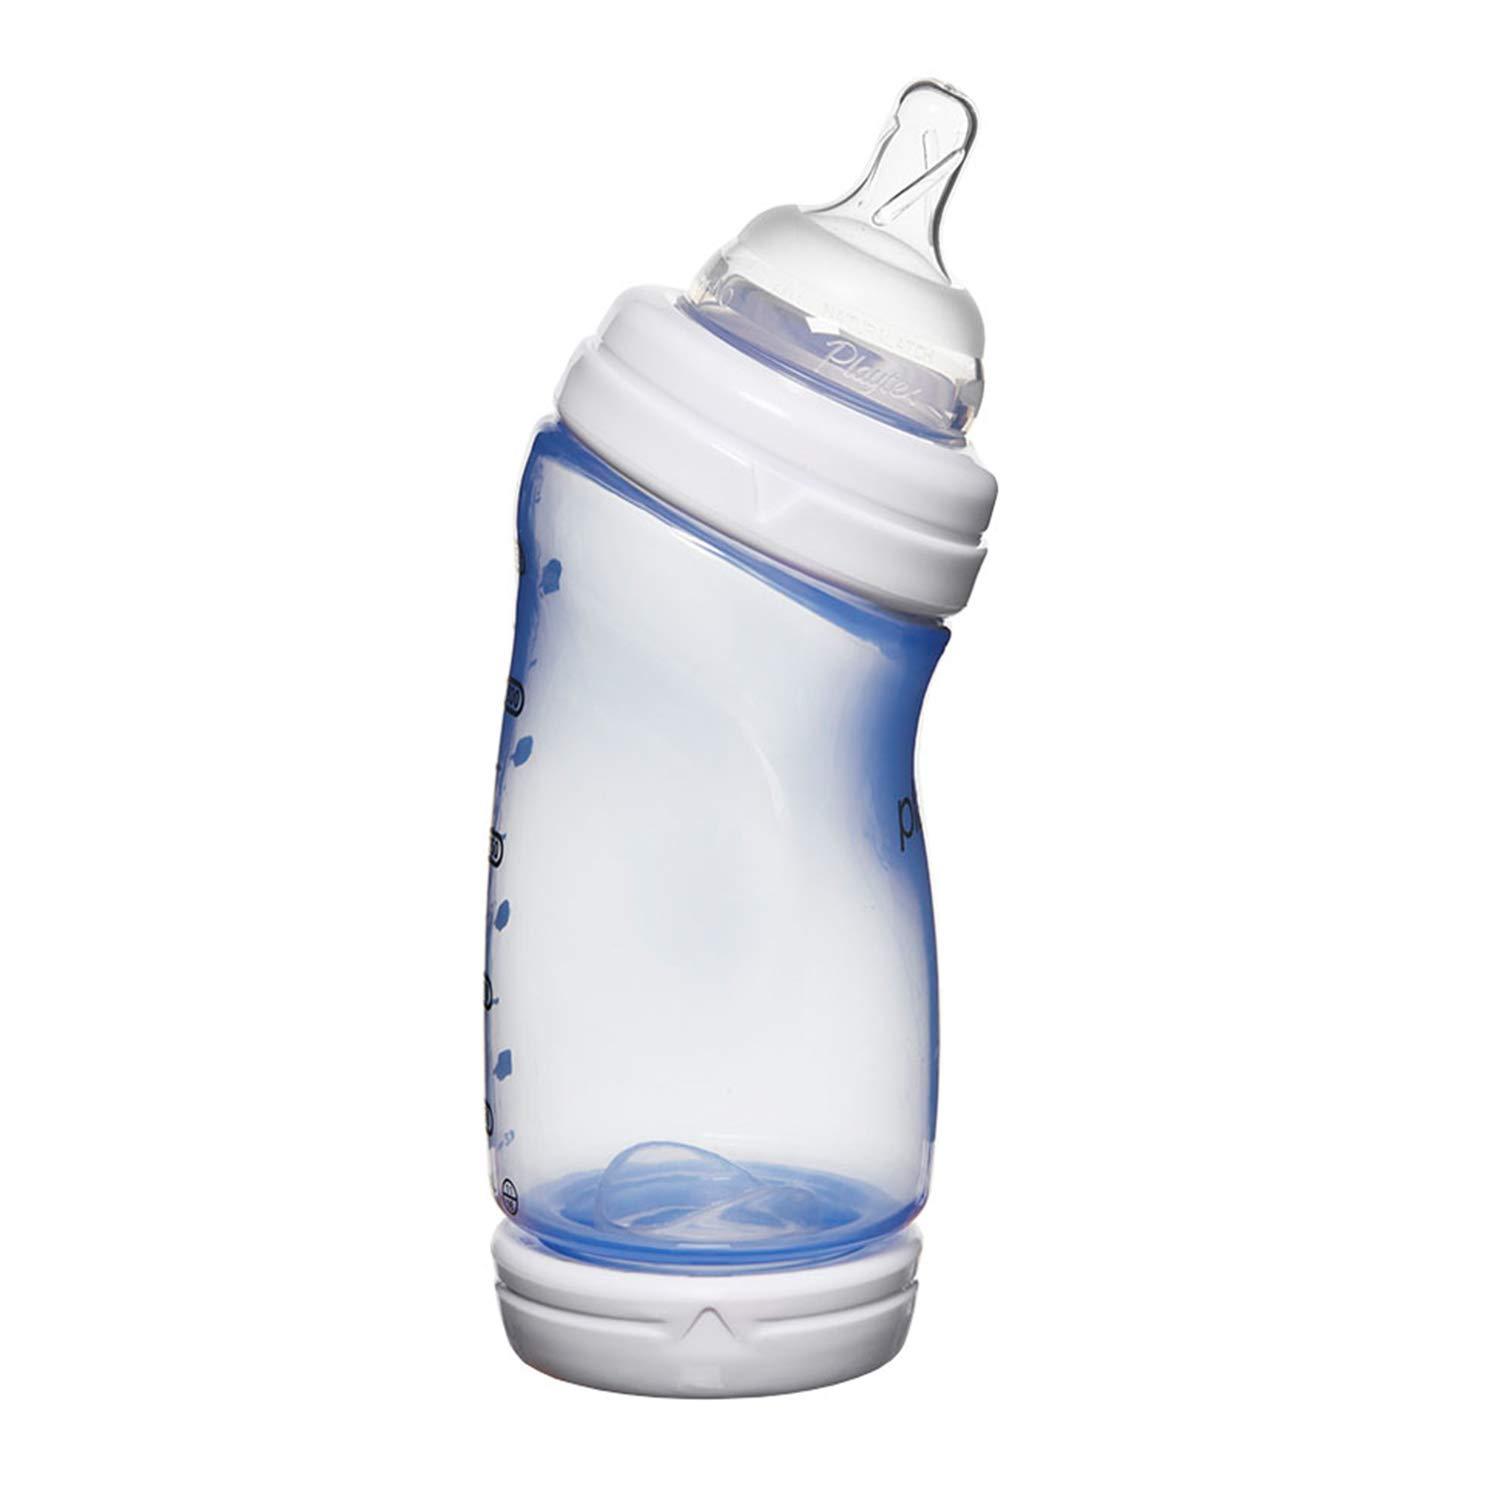 Playtex Baby VentAire Bottle for Boys Helps Prevent Colic and